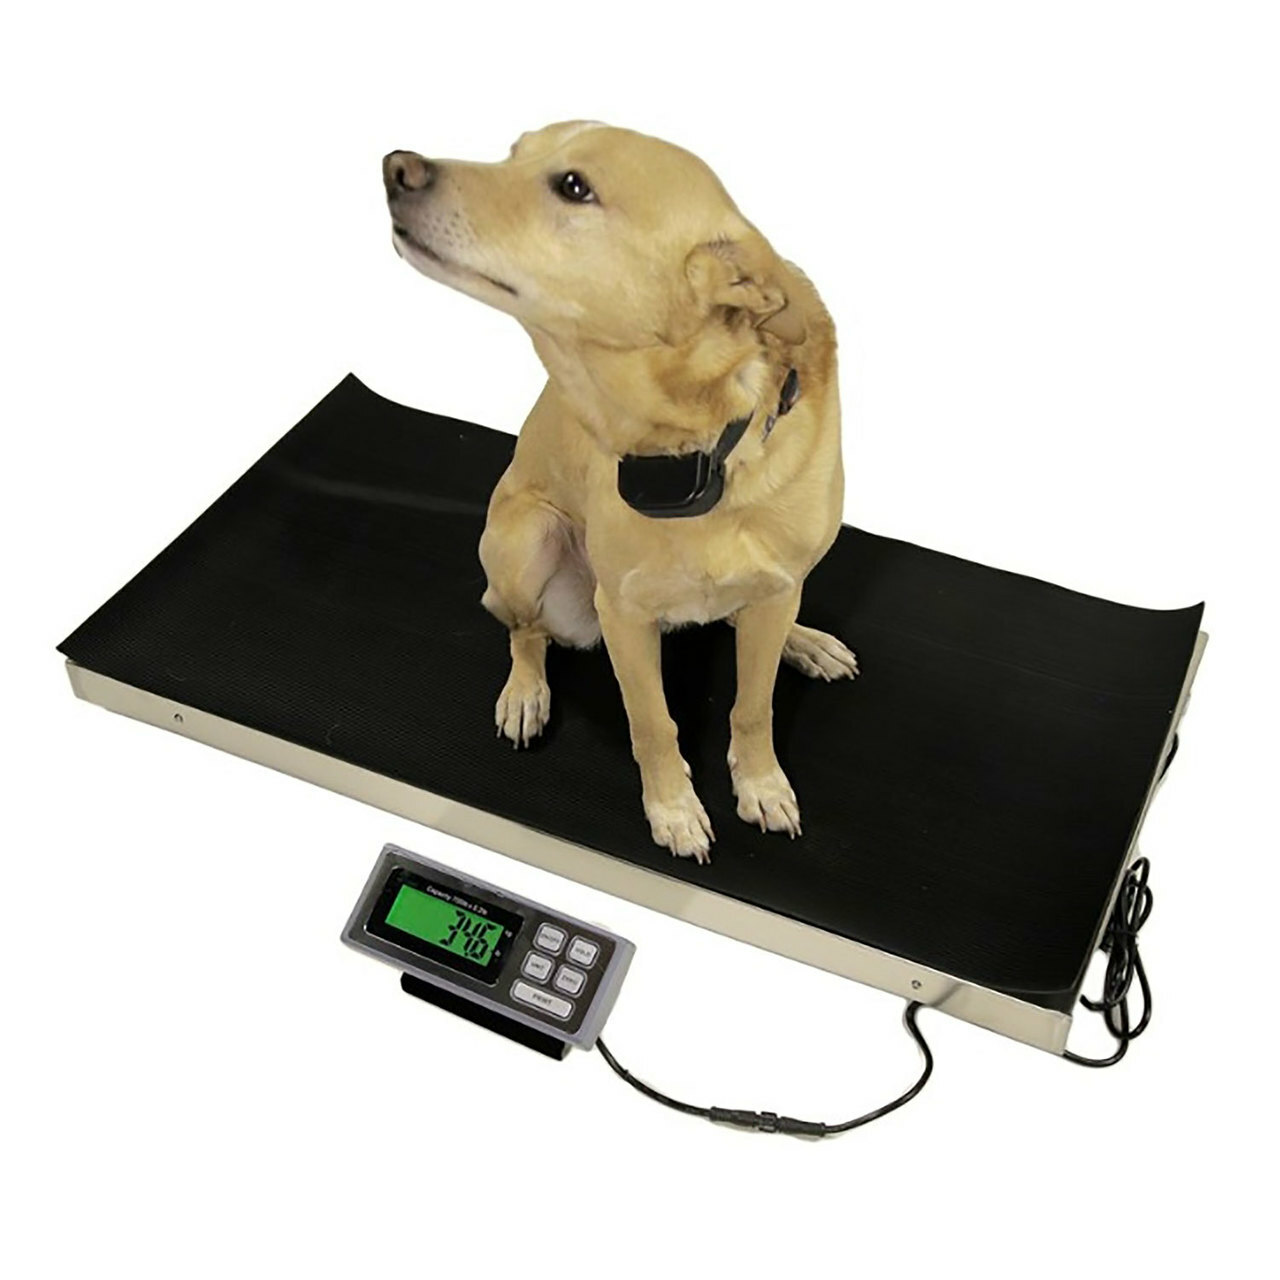 How can I make my own weighing scale?